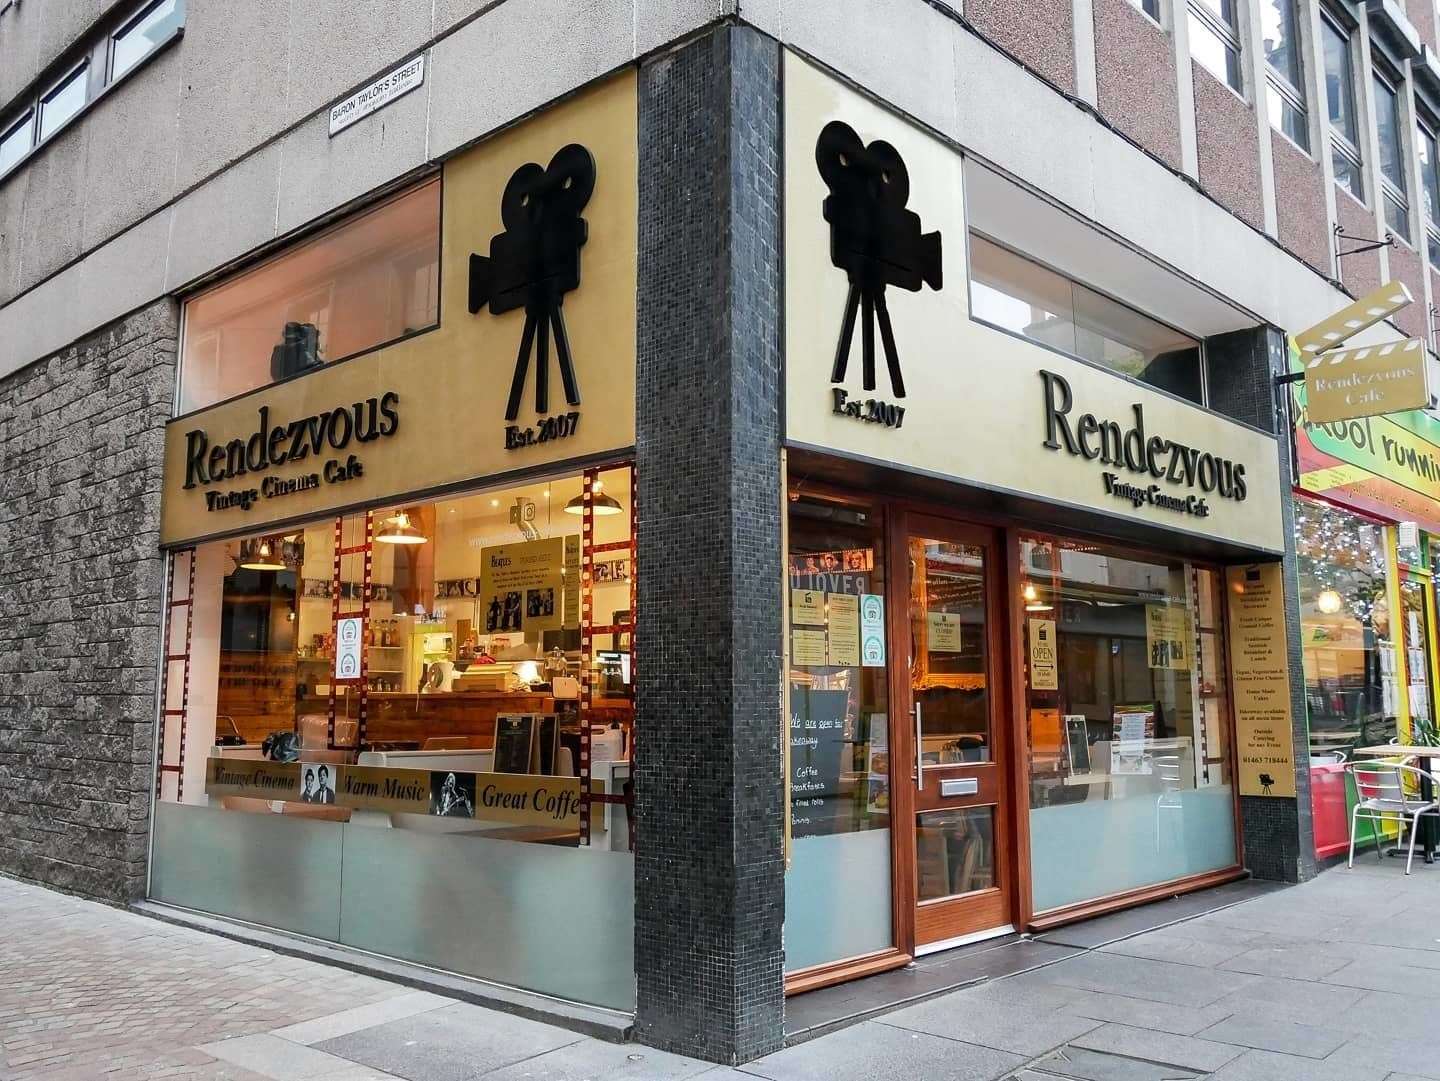 The Rendezvous Cafe.